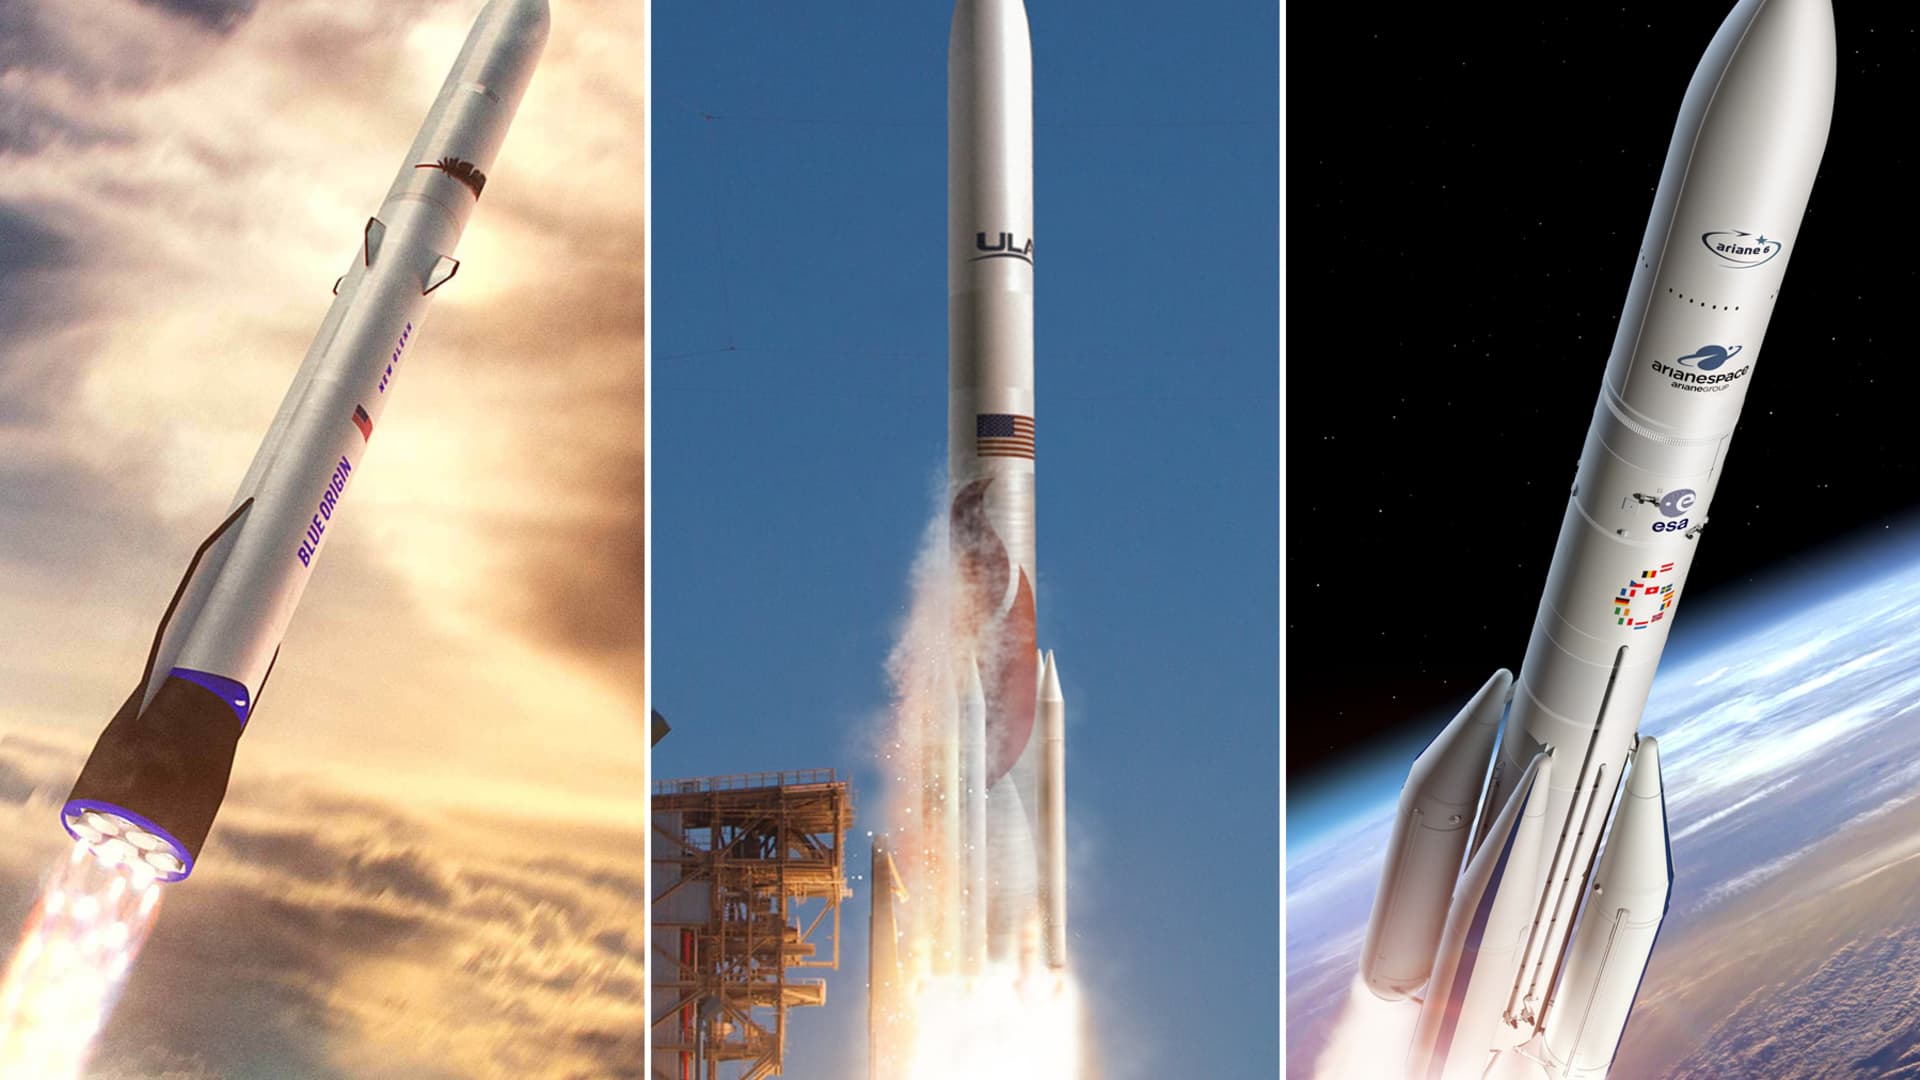 Amazon signs rocket deal with Blue Origin, Arianespace, ULA for Project Kuiper internet satellites